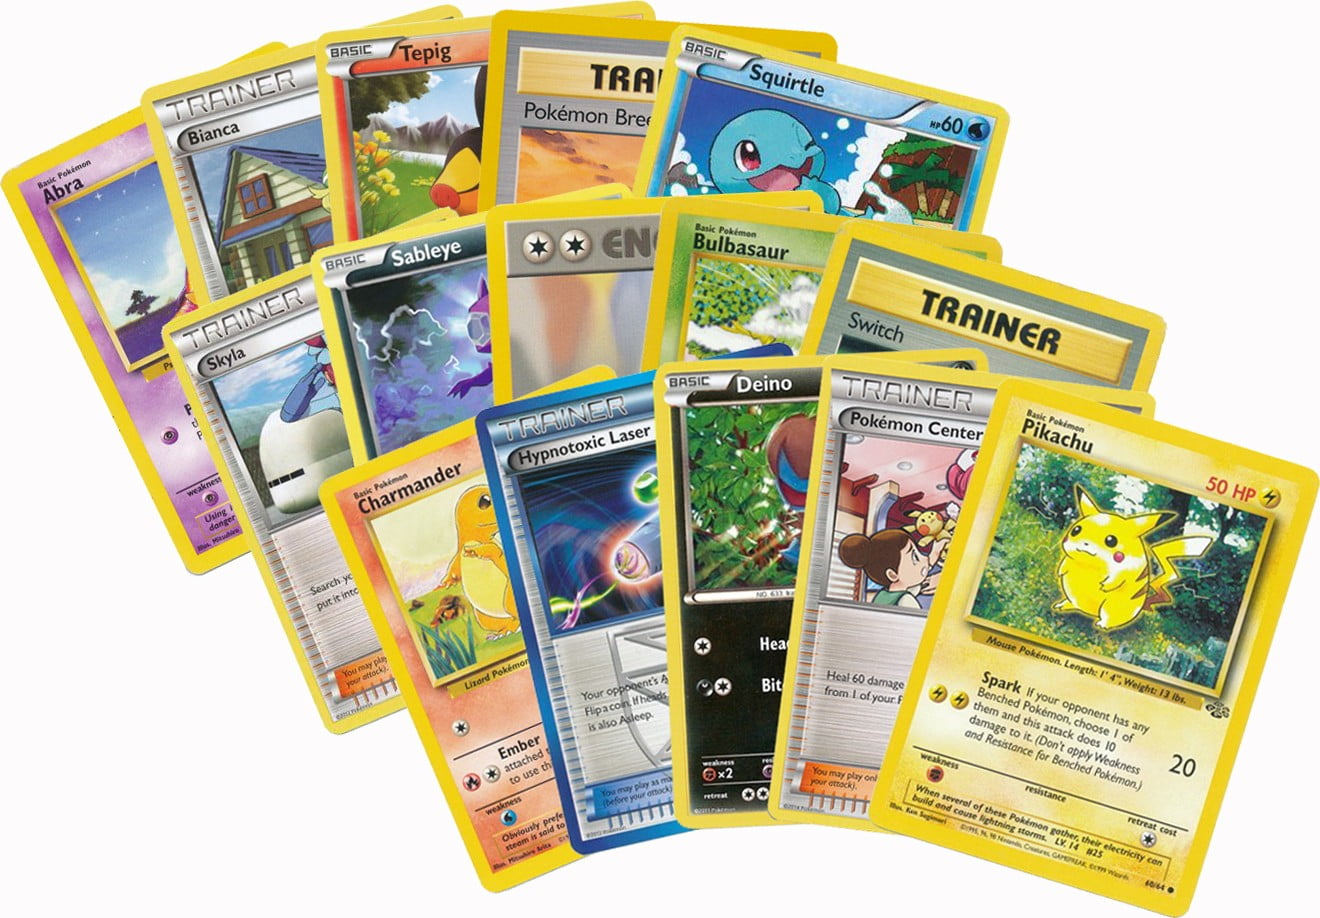 Buy Pokemon Assorted Lot of 50 Single Cards [Any Series]! No Duplication  Online at Lowest Price in Austria. 611116838